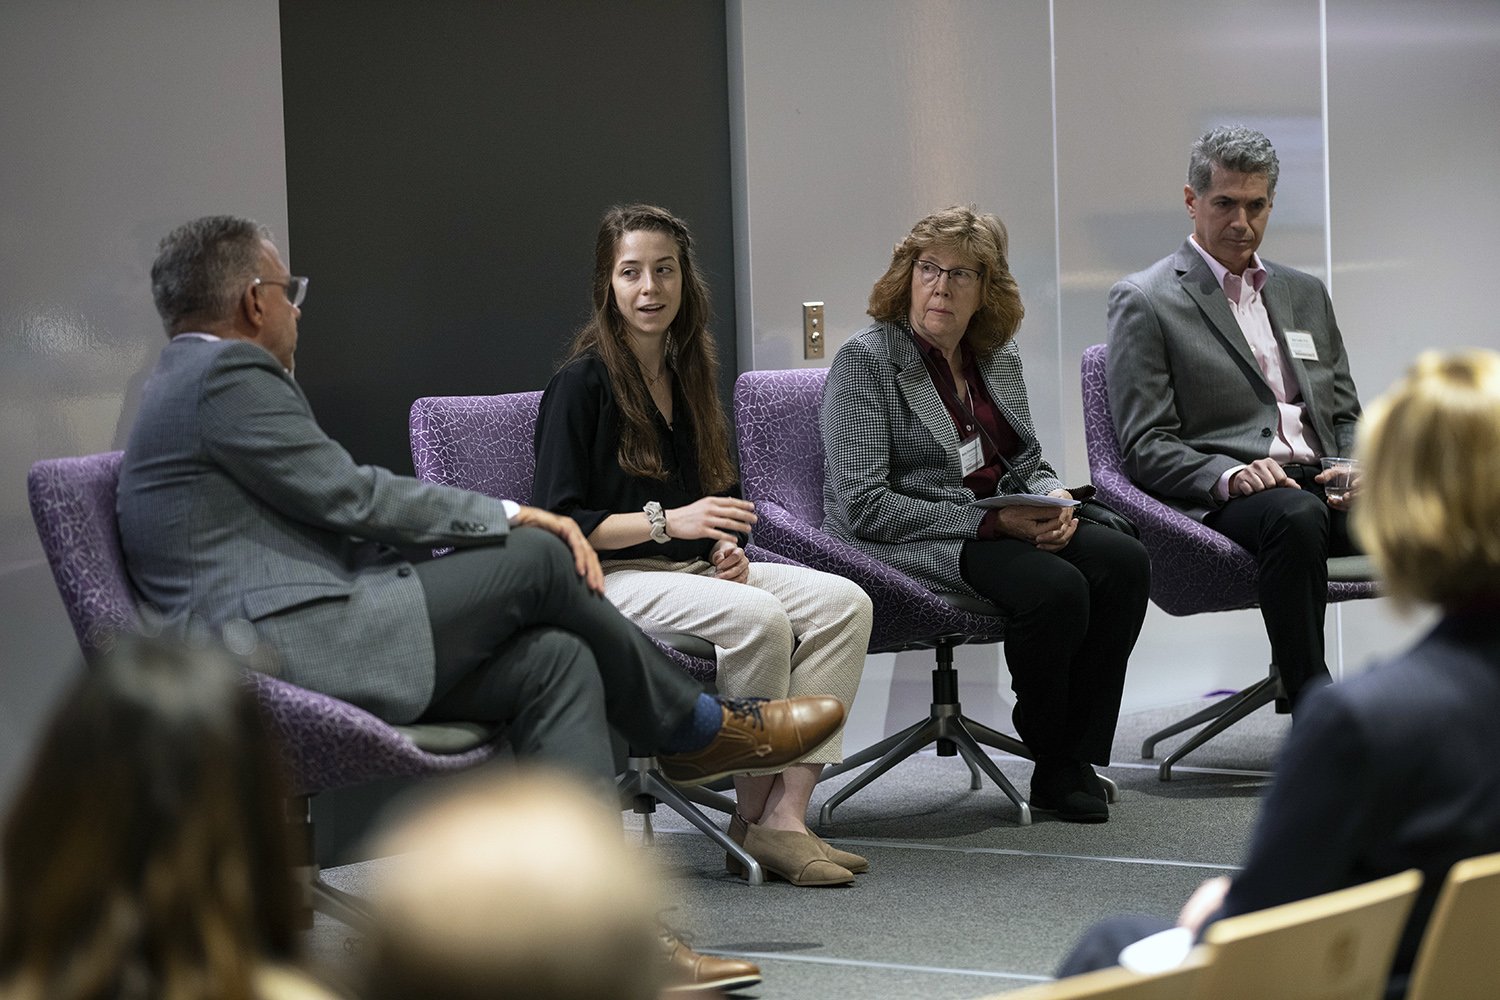 A panel discussion during the BioInnovation Forum at UAlbany, part of Research and Entrepreneurship Week.